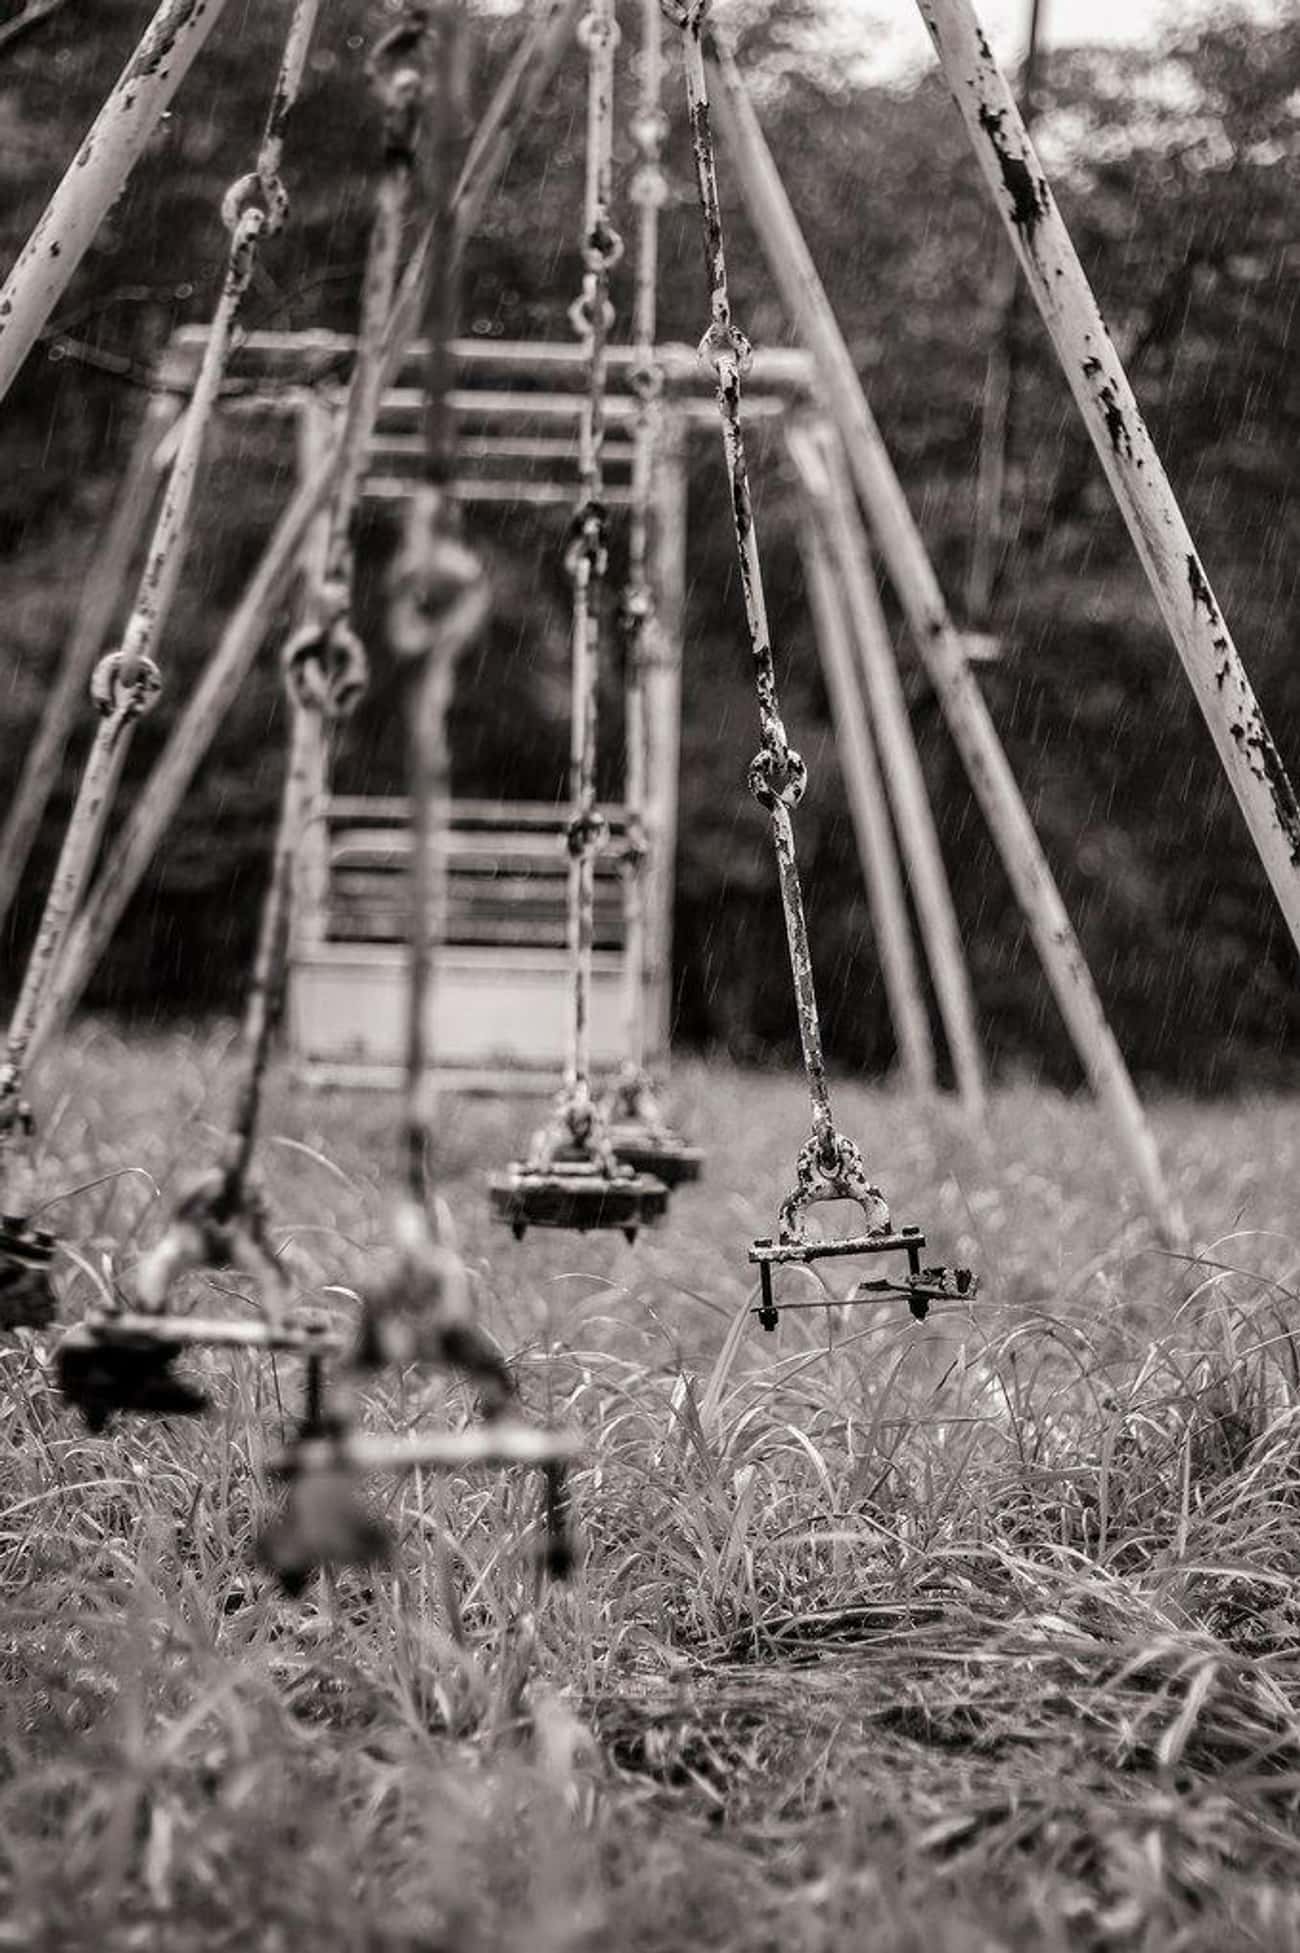 Ghosts Of Abducted Children Hang Out At A Cemetery Playground In Huntsville, AL